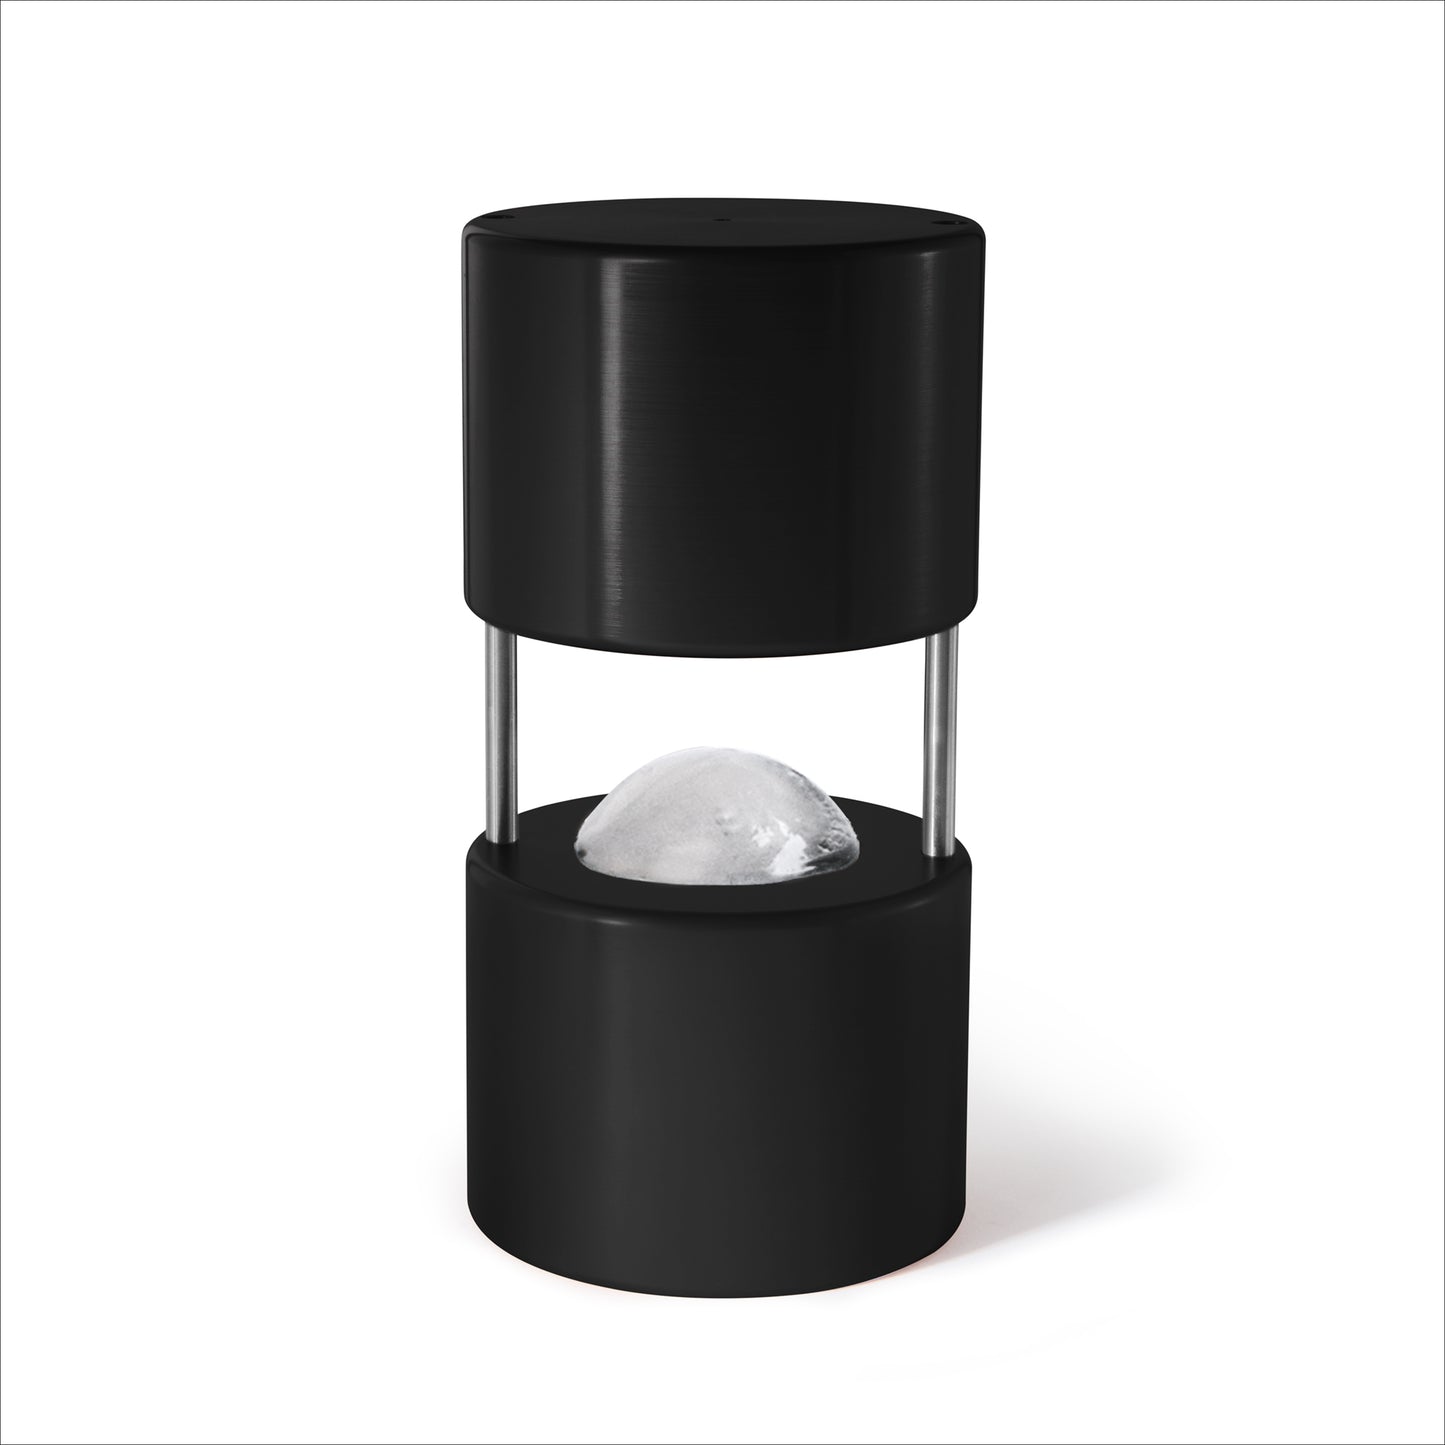 Japanese Ice Ball Maker — Bar Products